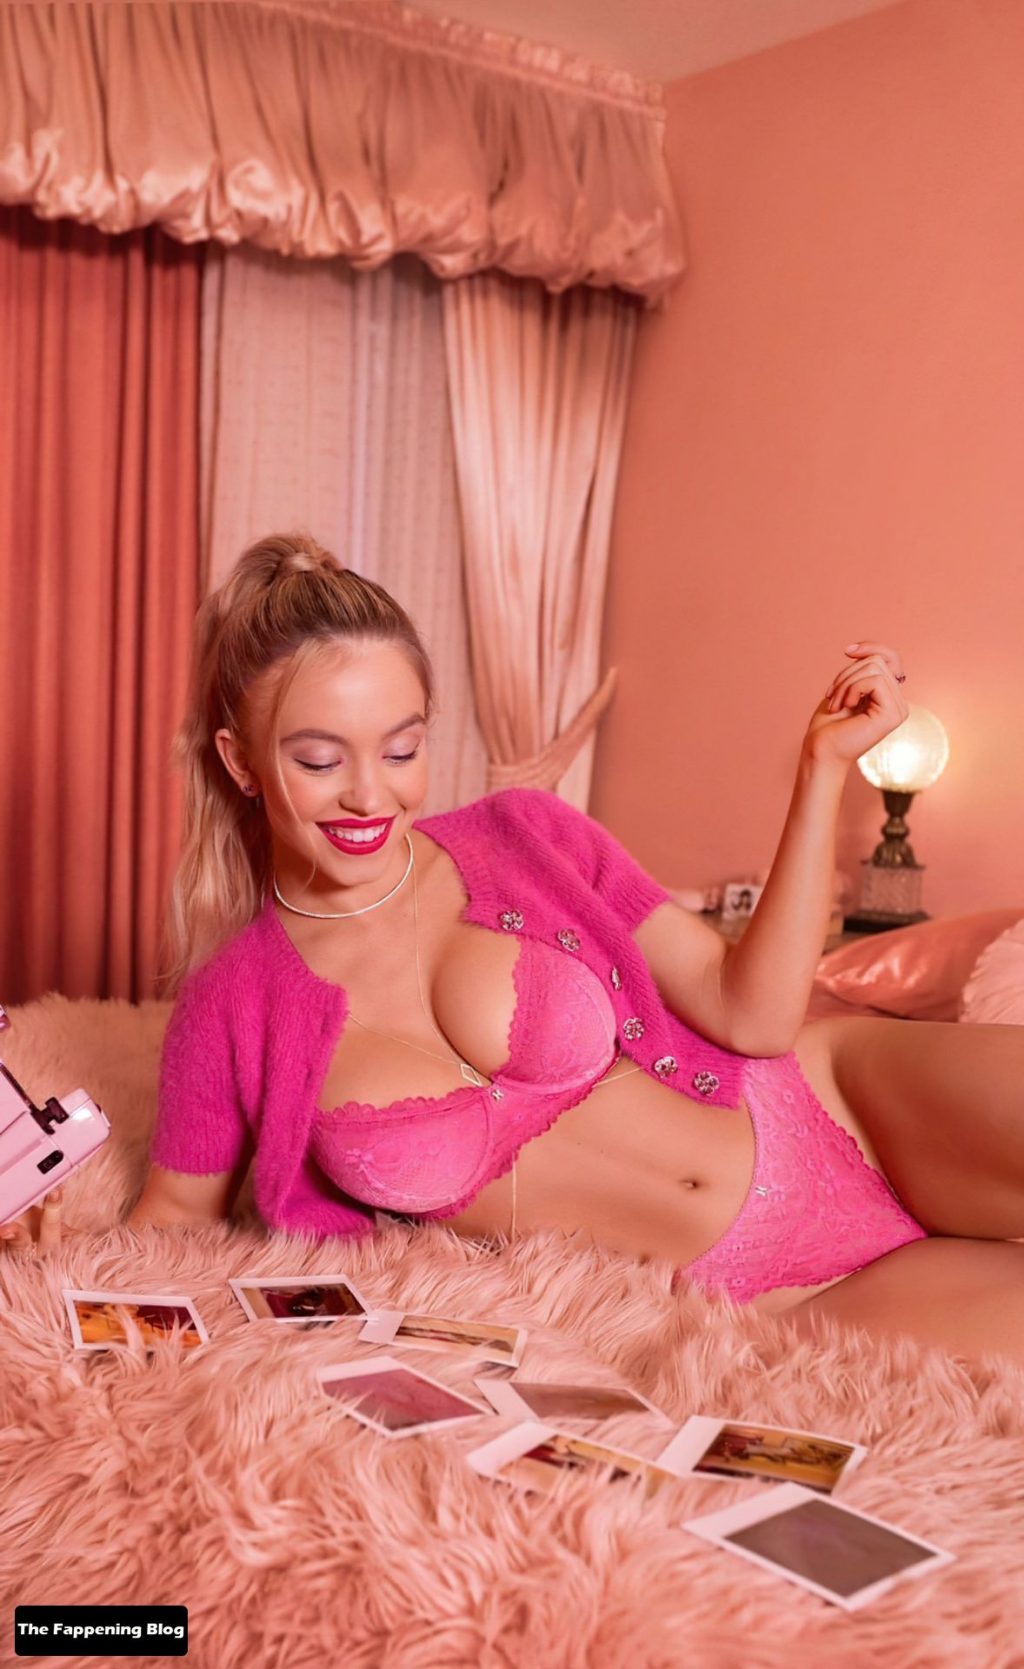 Sydney Sweeney Shows Off Her Magnificent Big Boobs in Sexy Pink Lingerie (7 Photos)